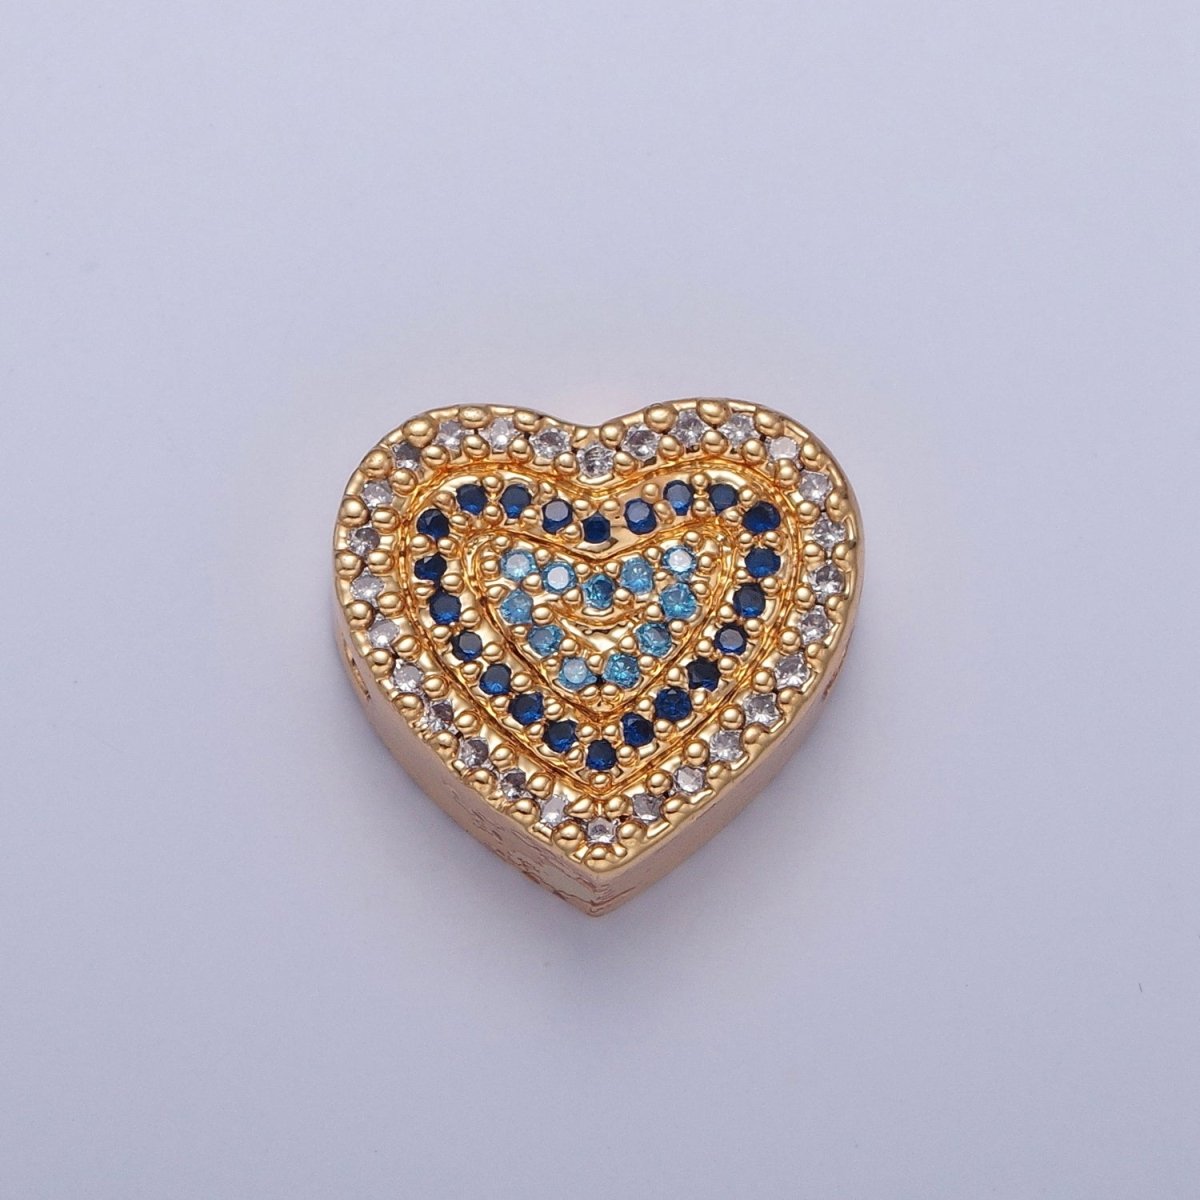 24K Gold Filled Micro Pave Cubic Zirconia Heart Spacer Bead, Multicolor Cubic Zirconia CZ Valentine Love Jewelry Making Component W-898 W-899 W-900 W-901 - DLUXCA